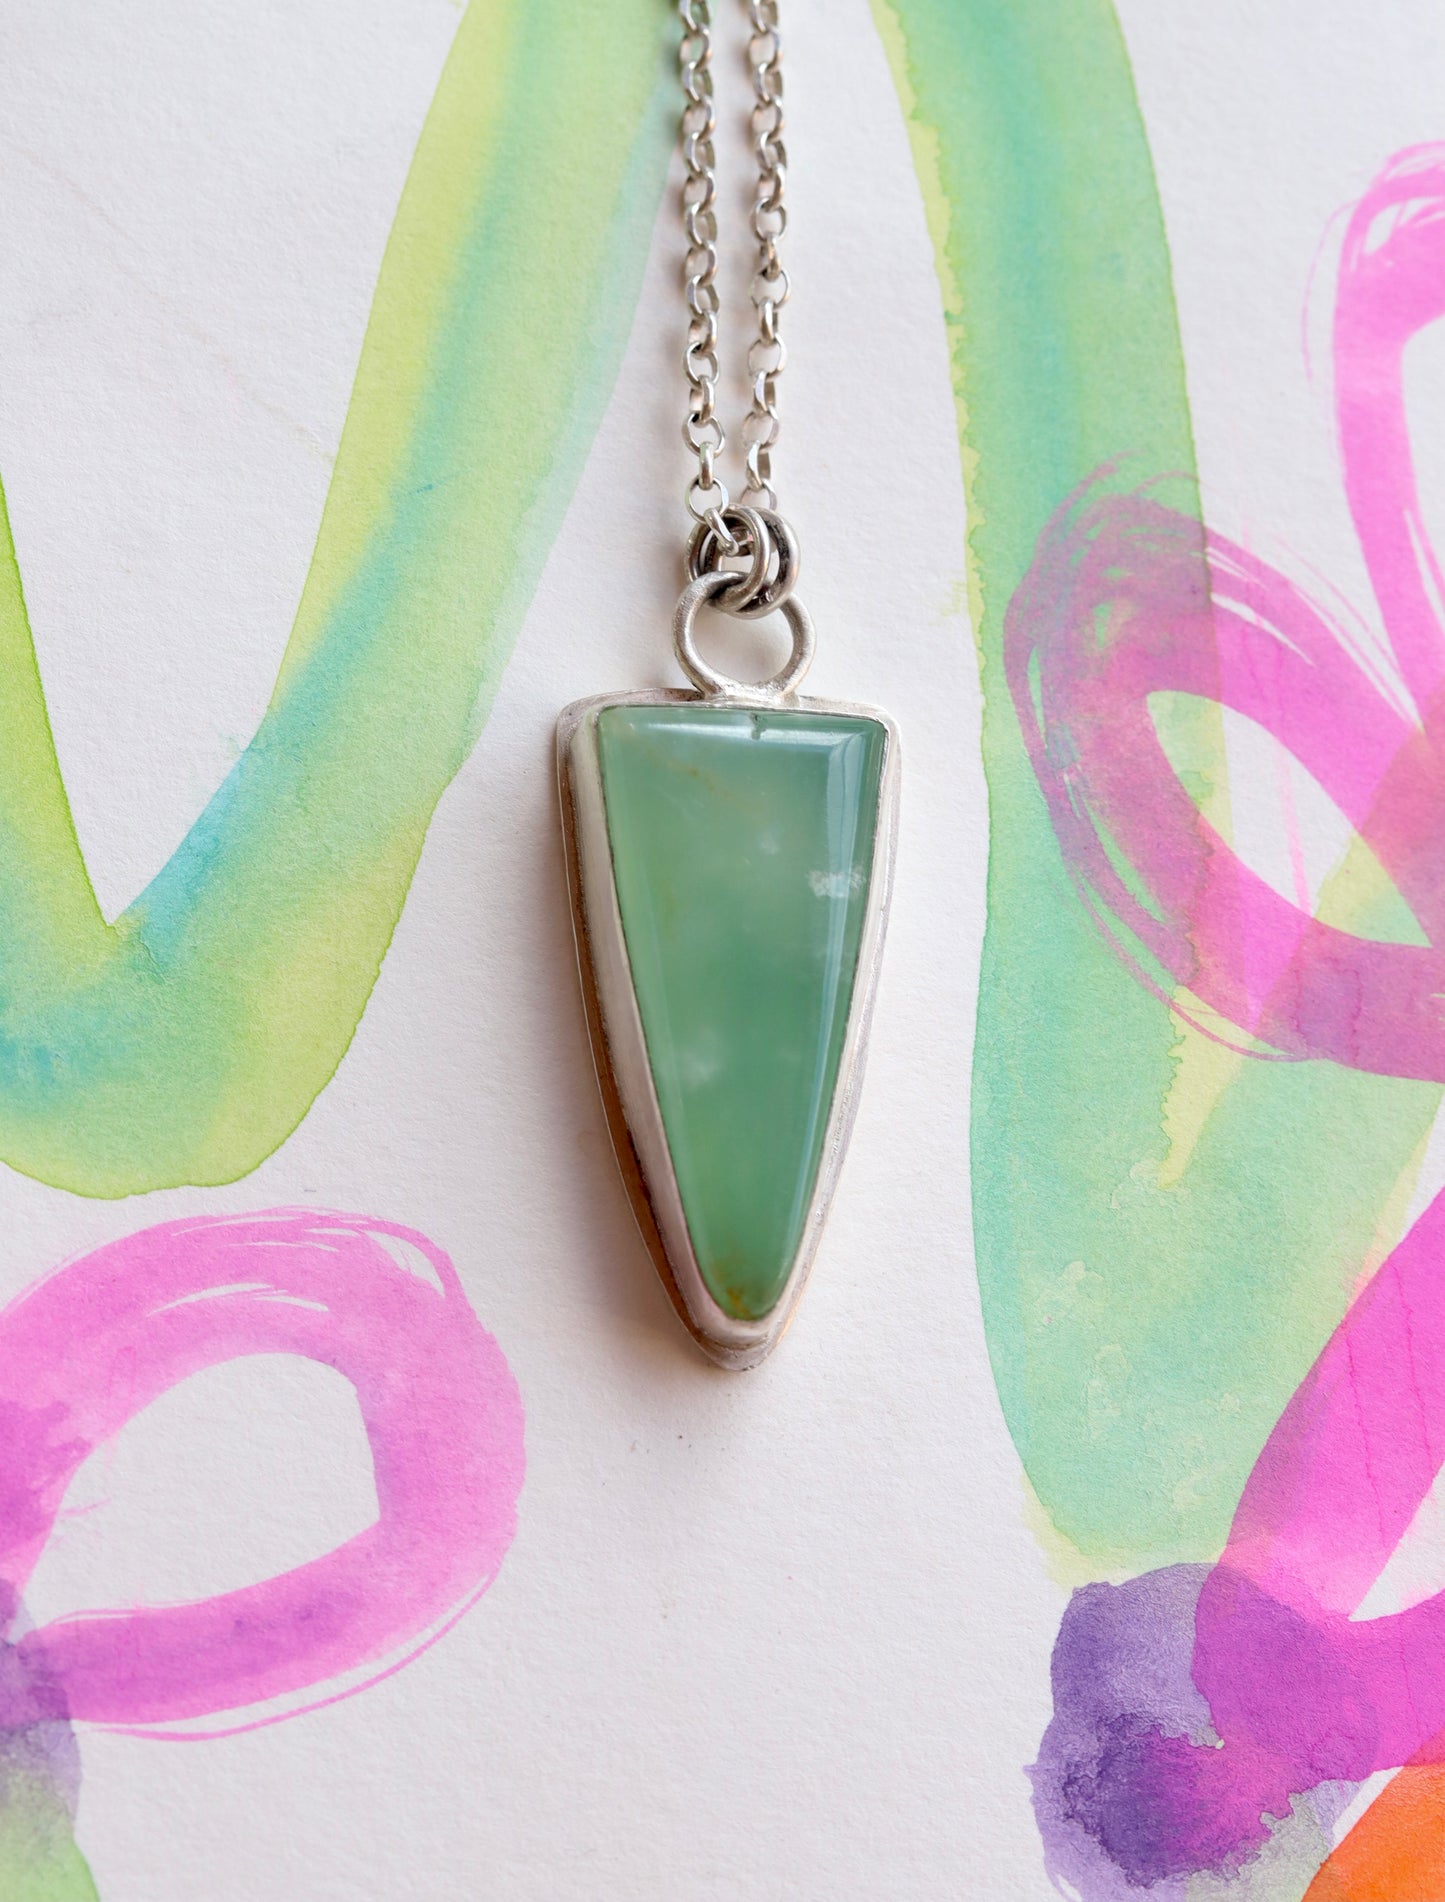 chrysoprase necklace pendant recycled silver handcrafted jewelry